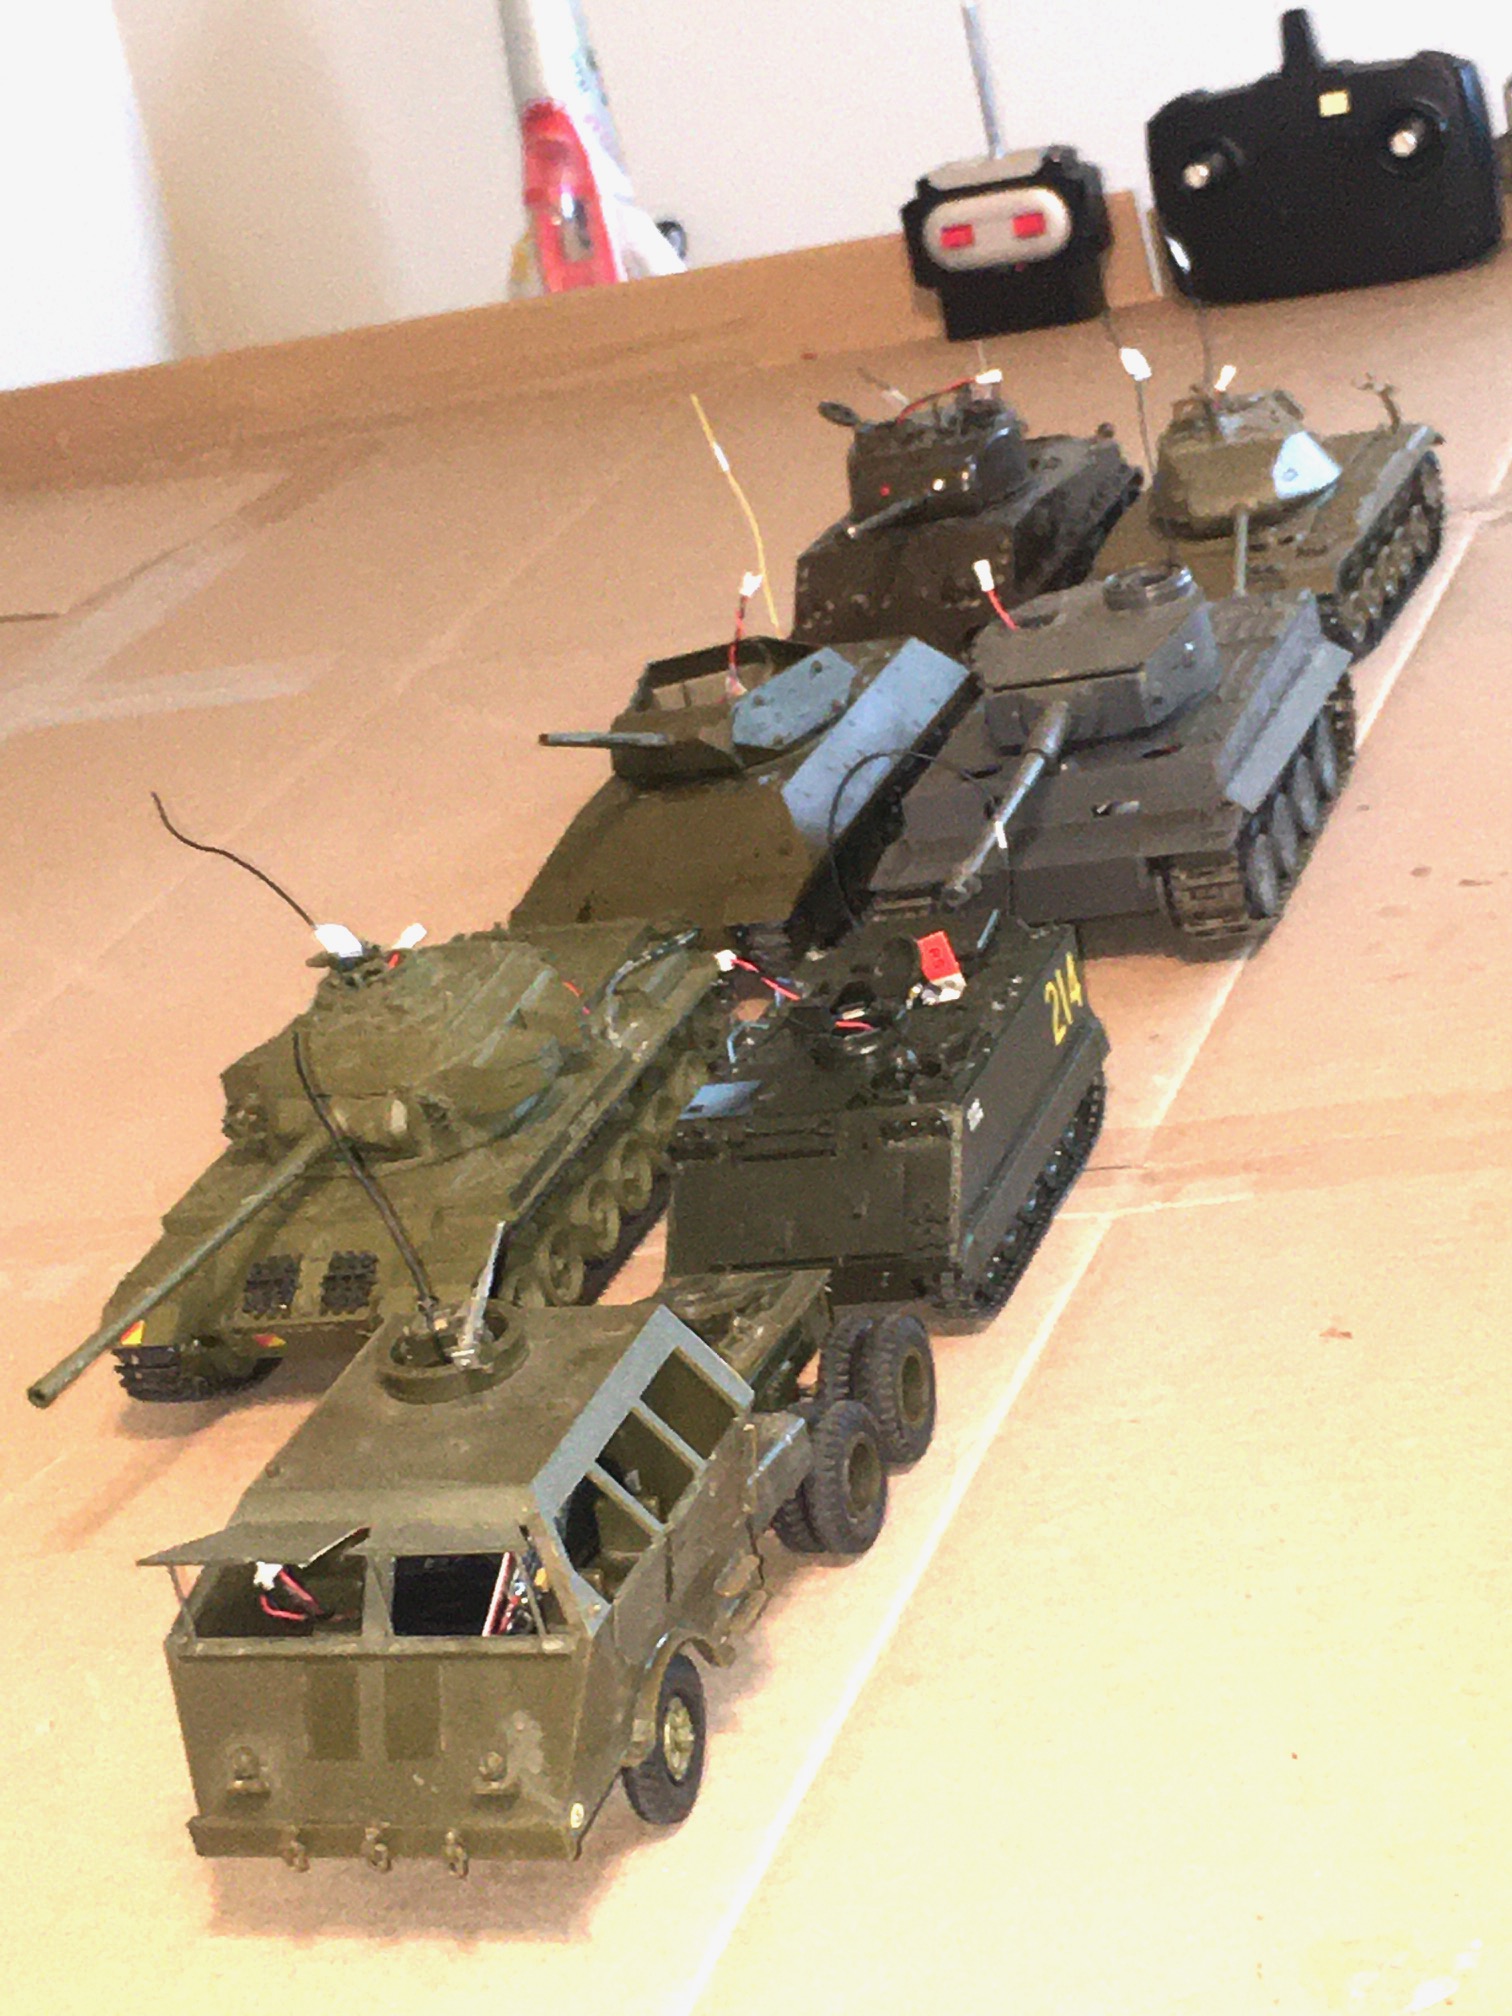 7 1/35 scale models with Vintage rc gear. 1 truck in there as well as a APC.